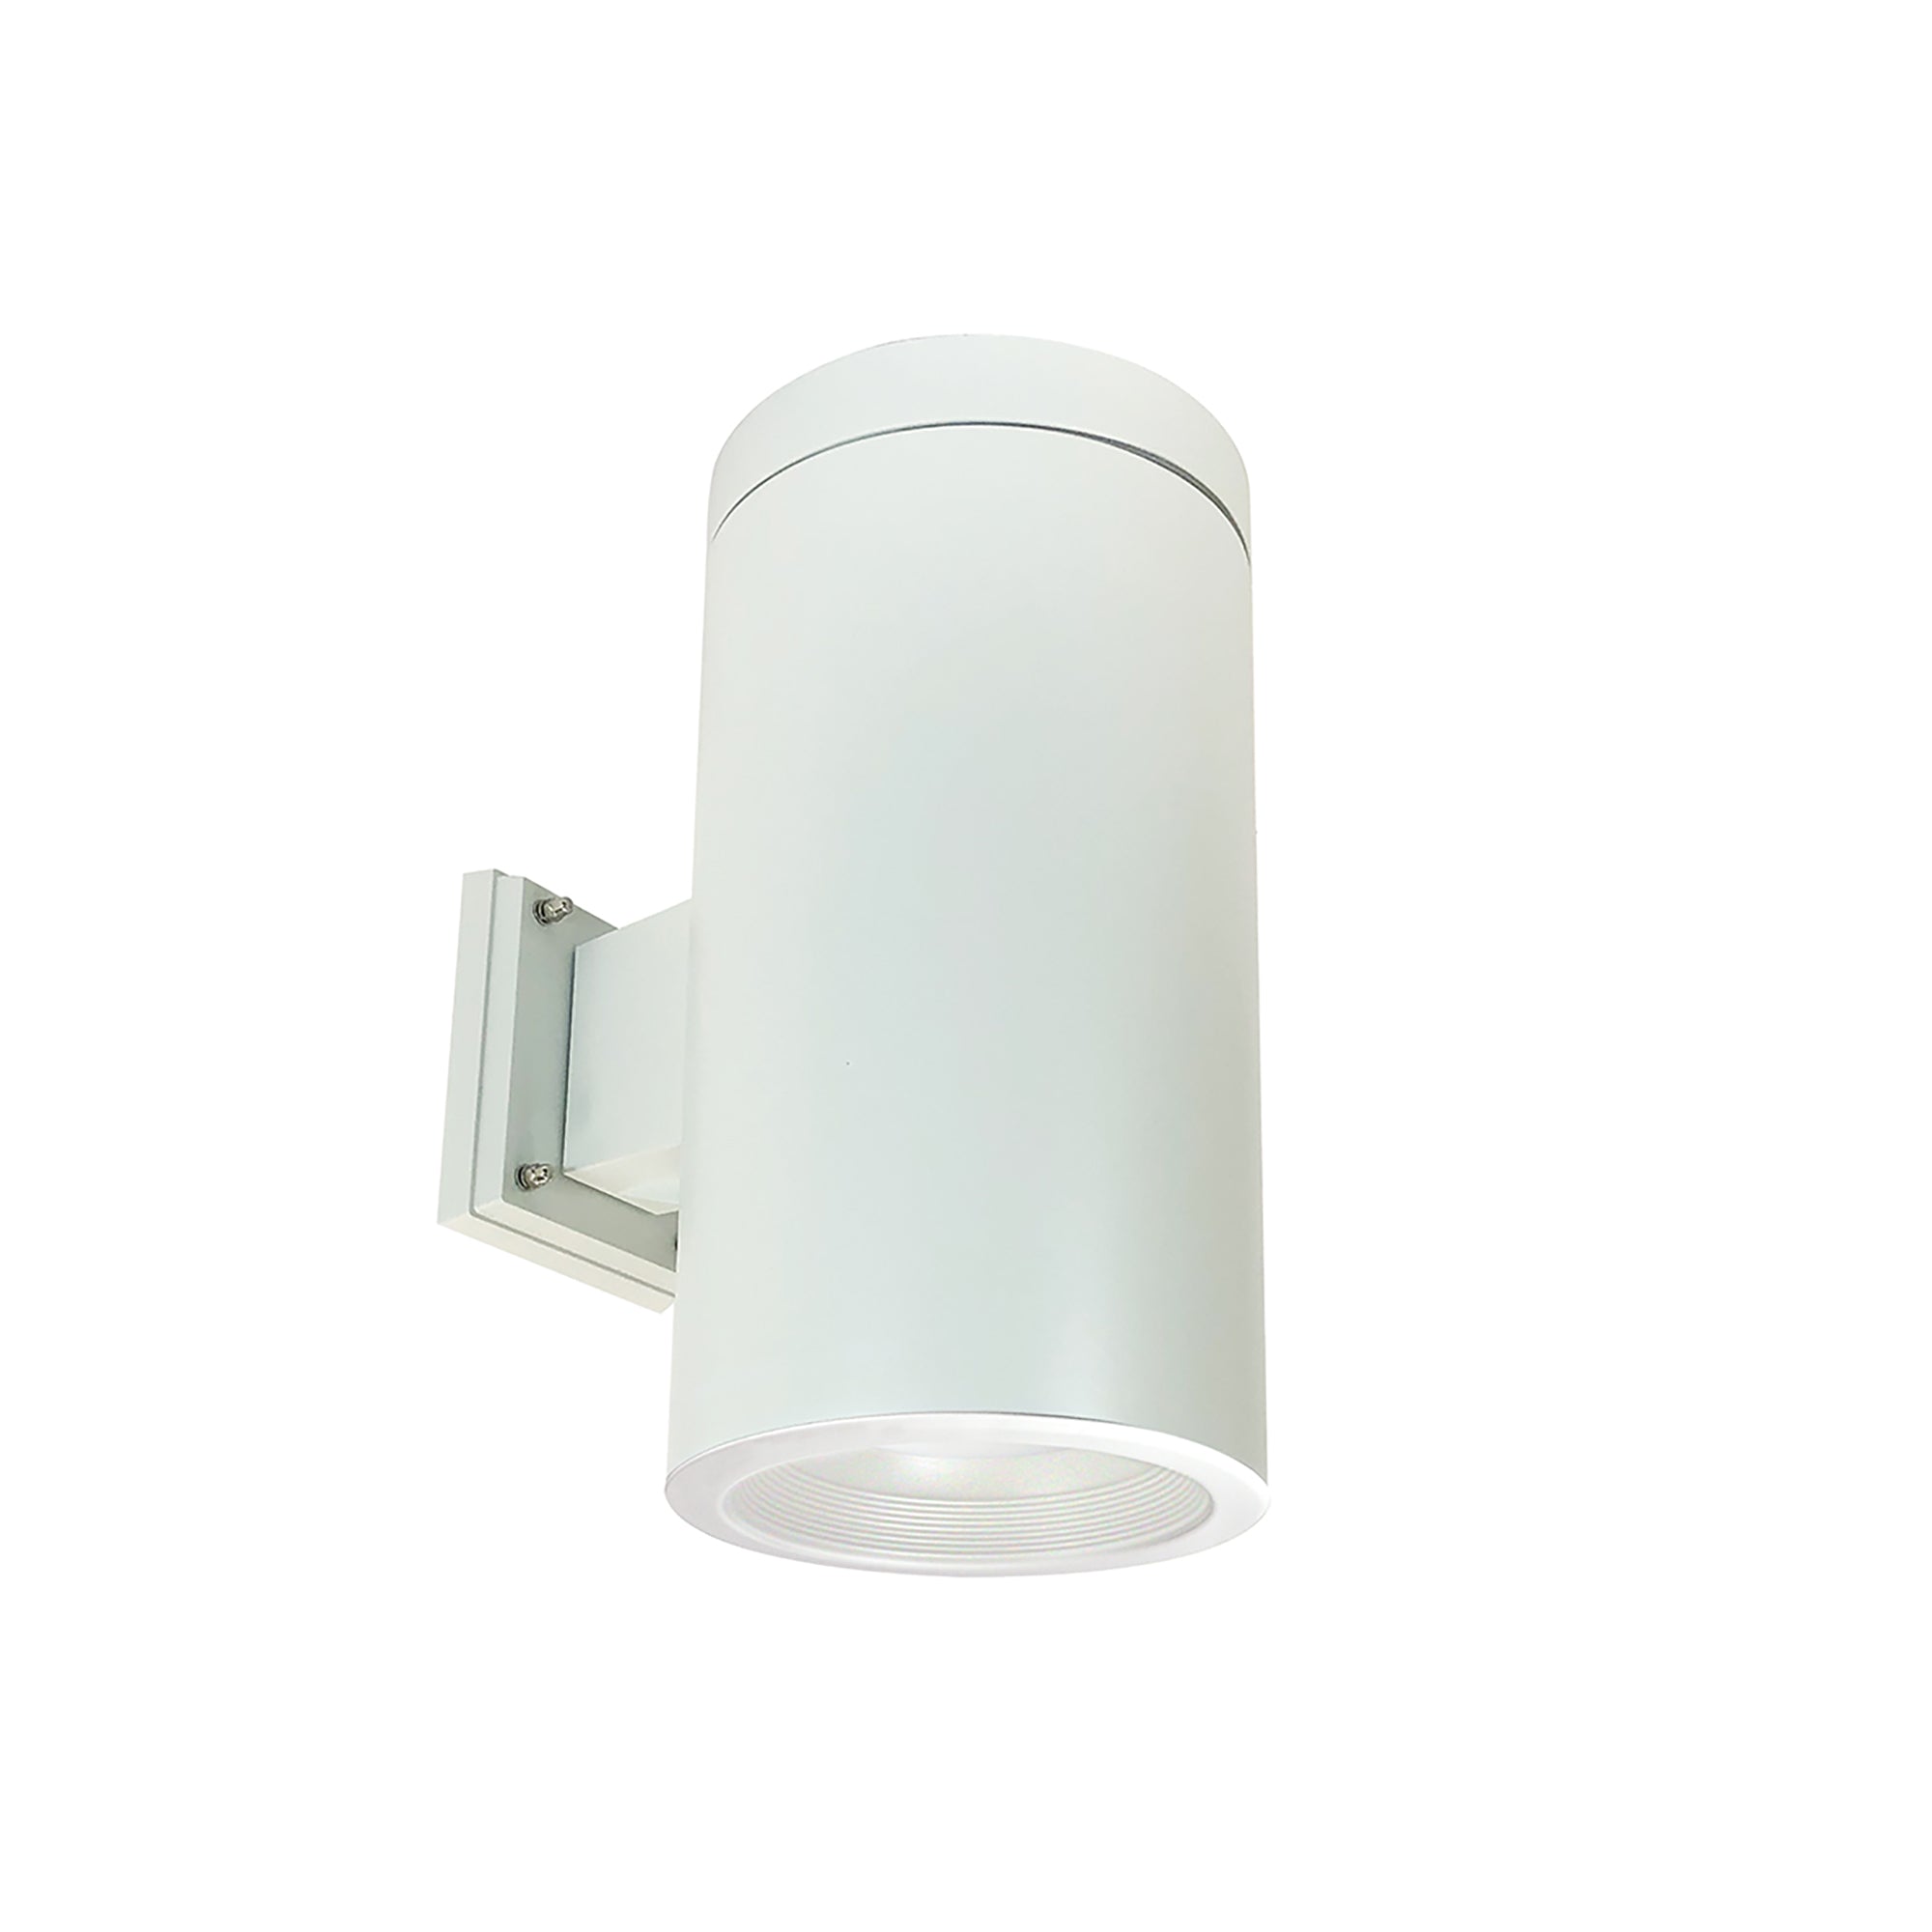 Nora Lighting NYLI-6WI2WWW - Cylinder - 6 Inch Cylinder, White, Wall Mount, Incandescent, Baf., White